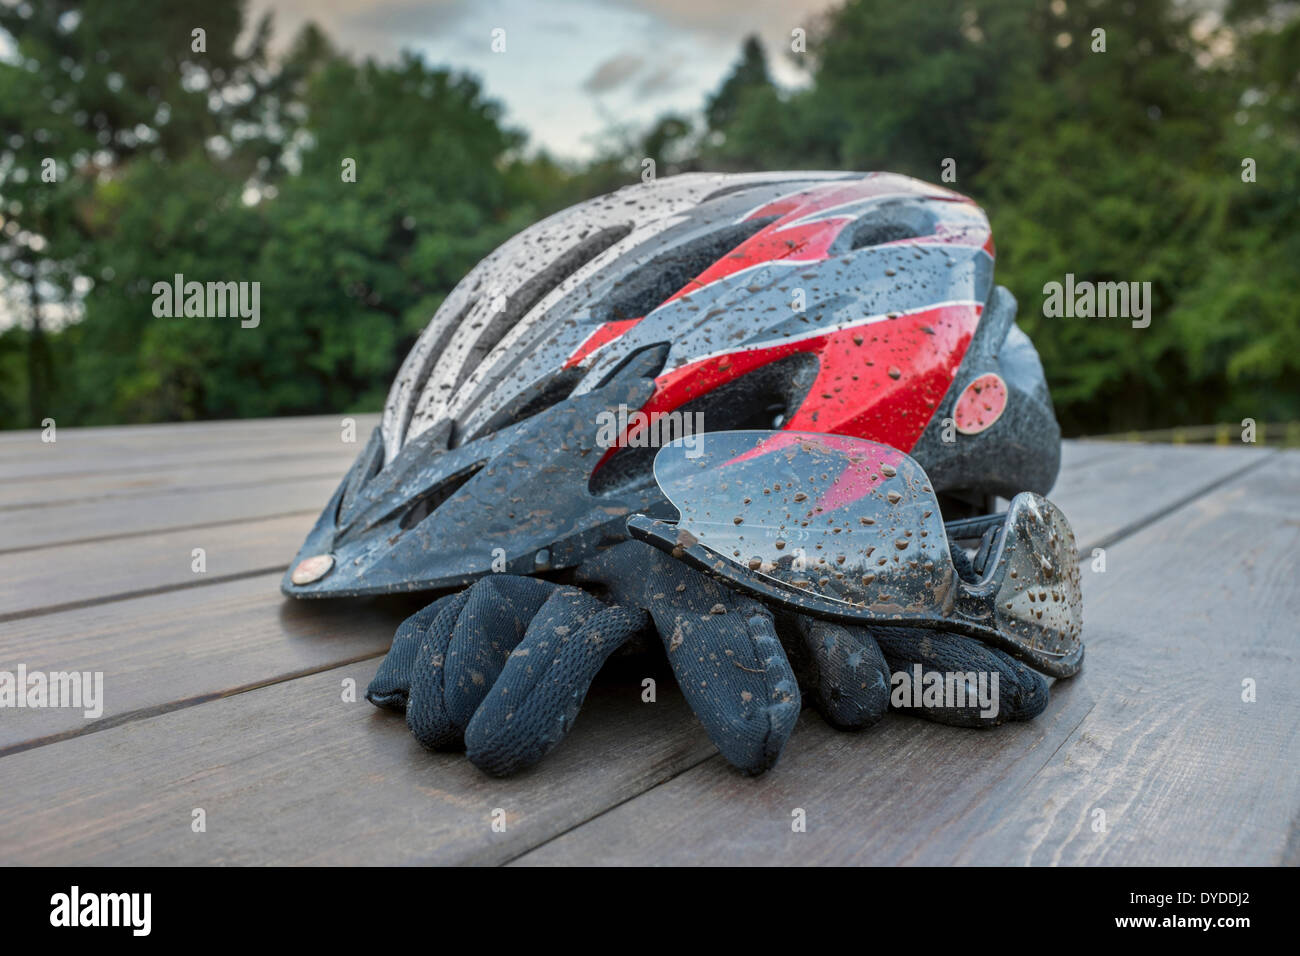 Mud spattered cycle helmet with glasses and gloves. Stock Photo